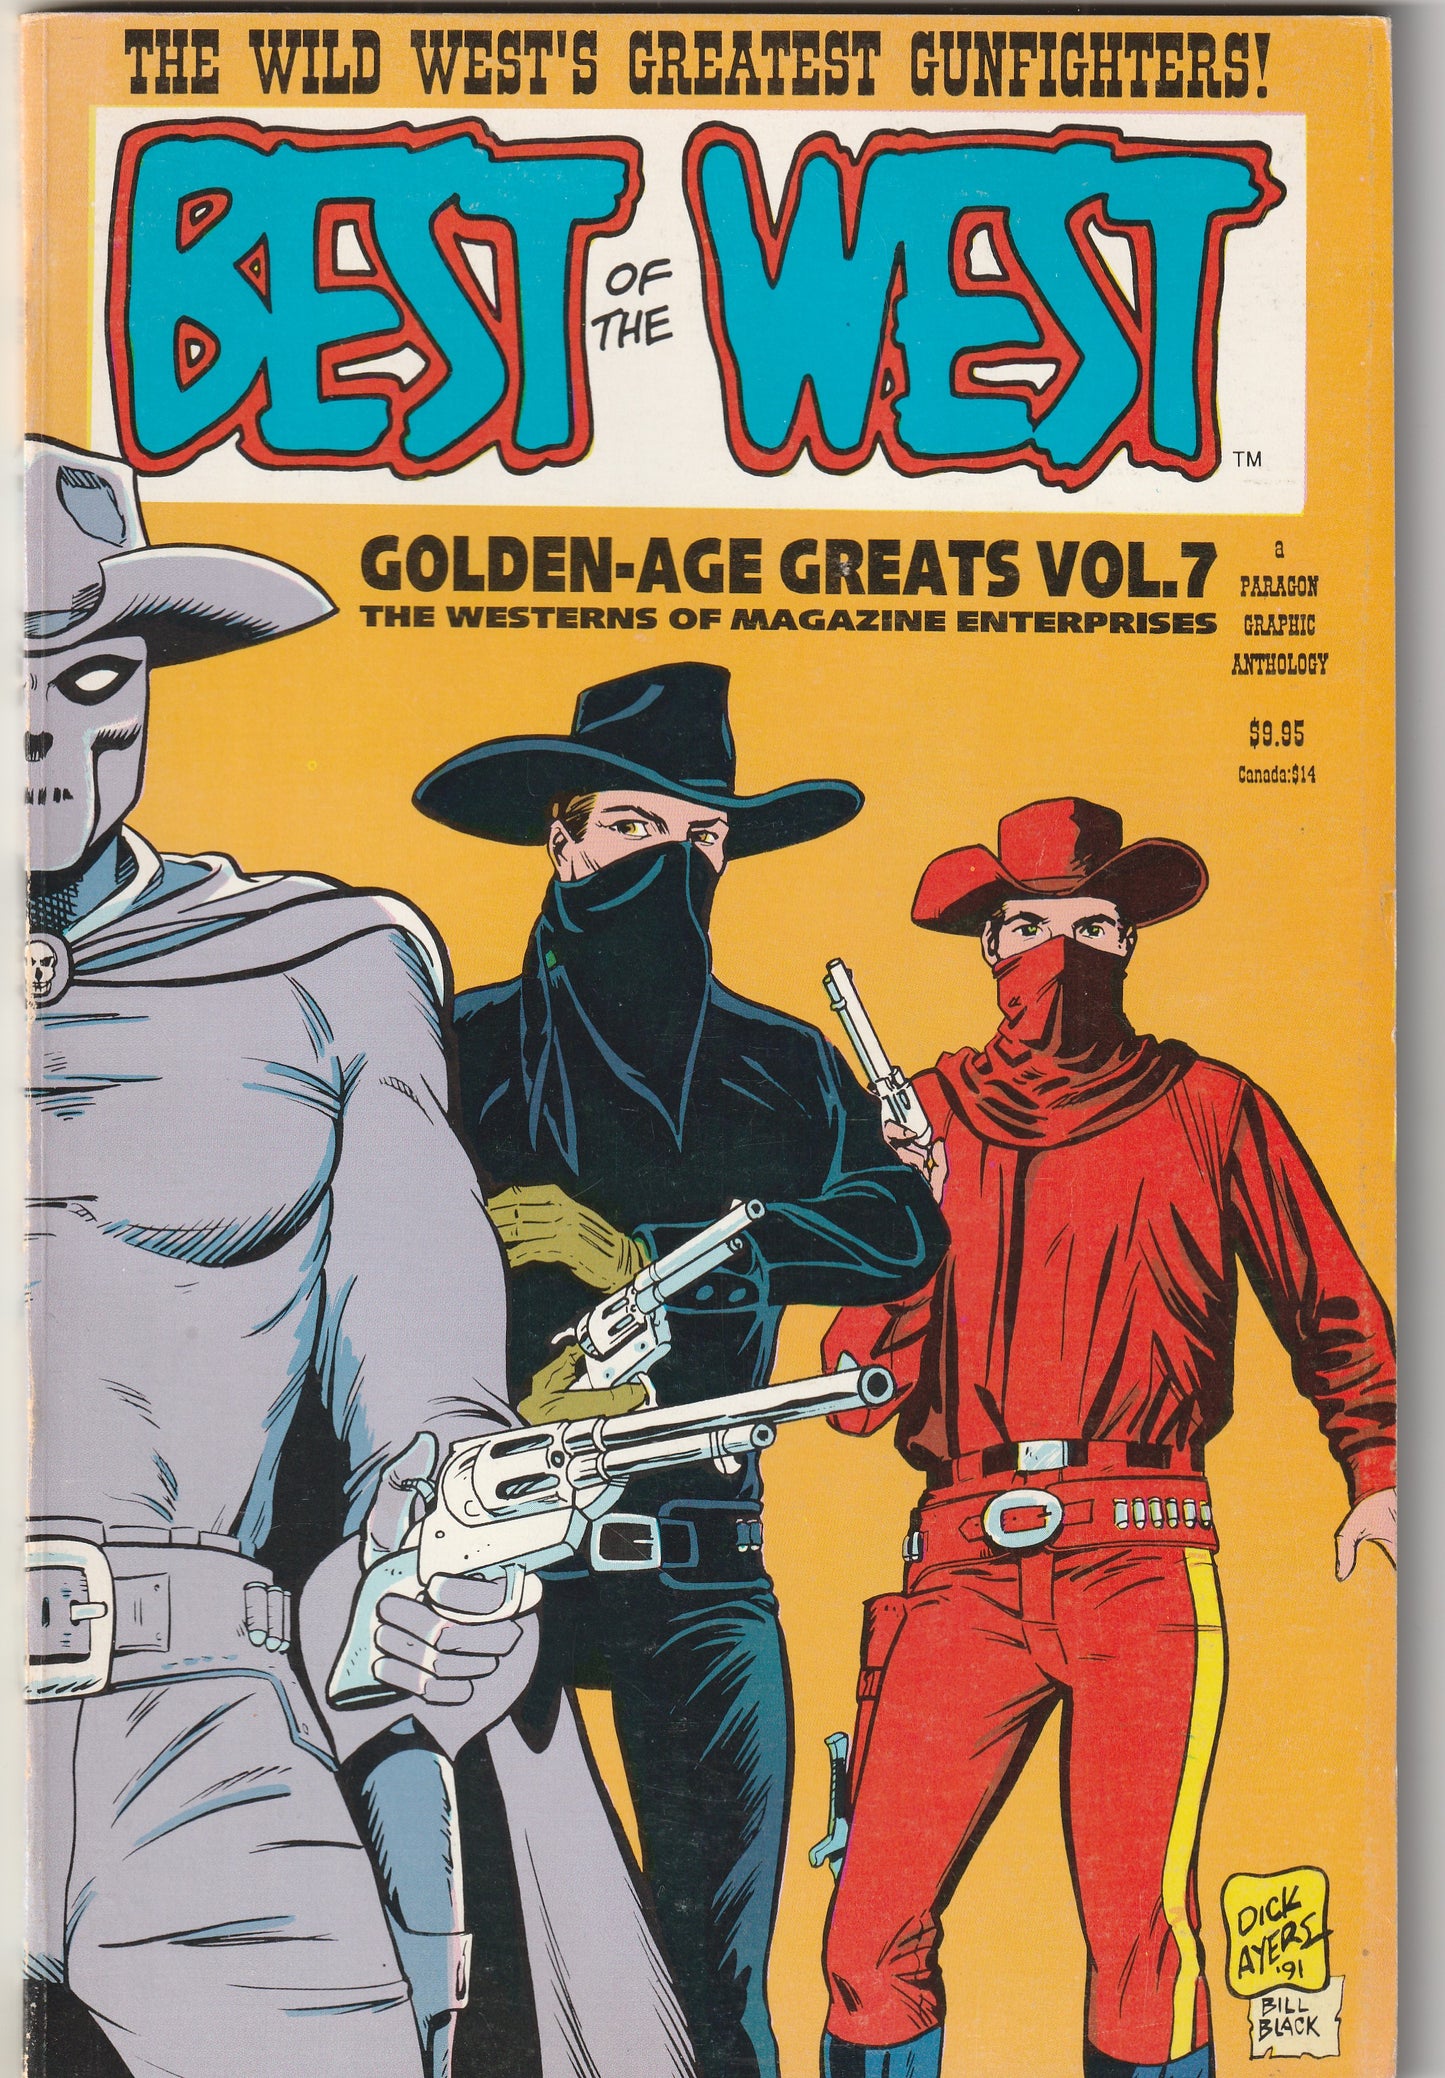 Golden-Age Greats Volume 7 - Best of the West (1996)